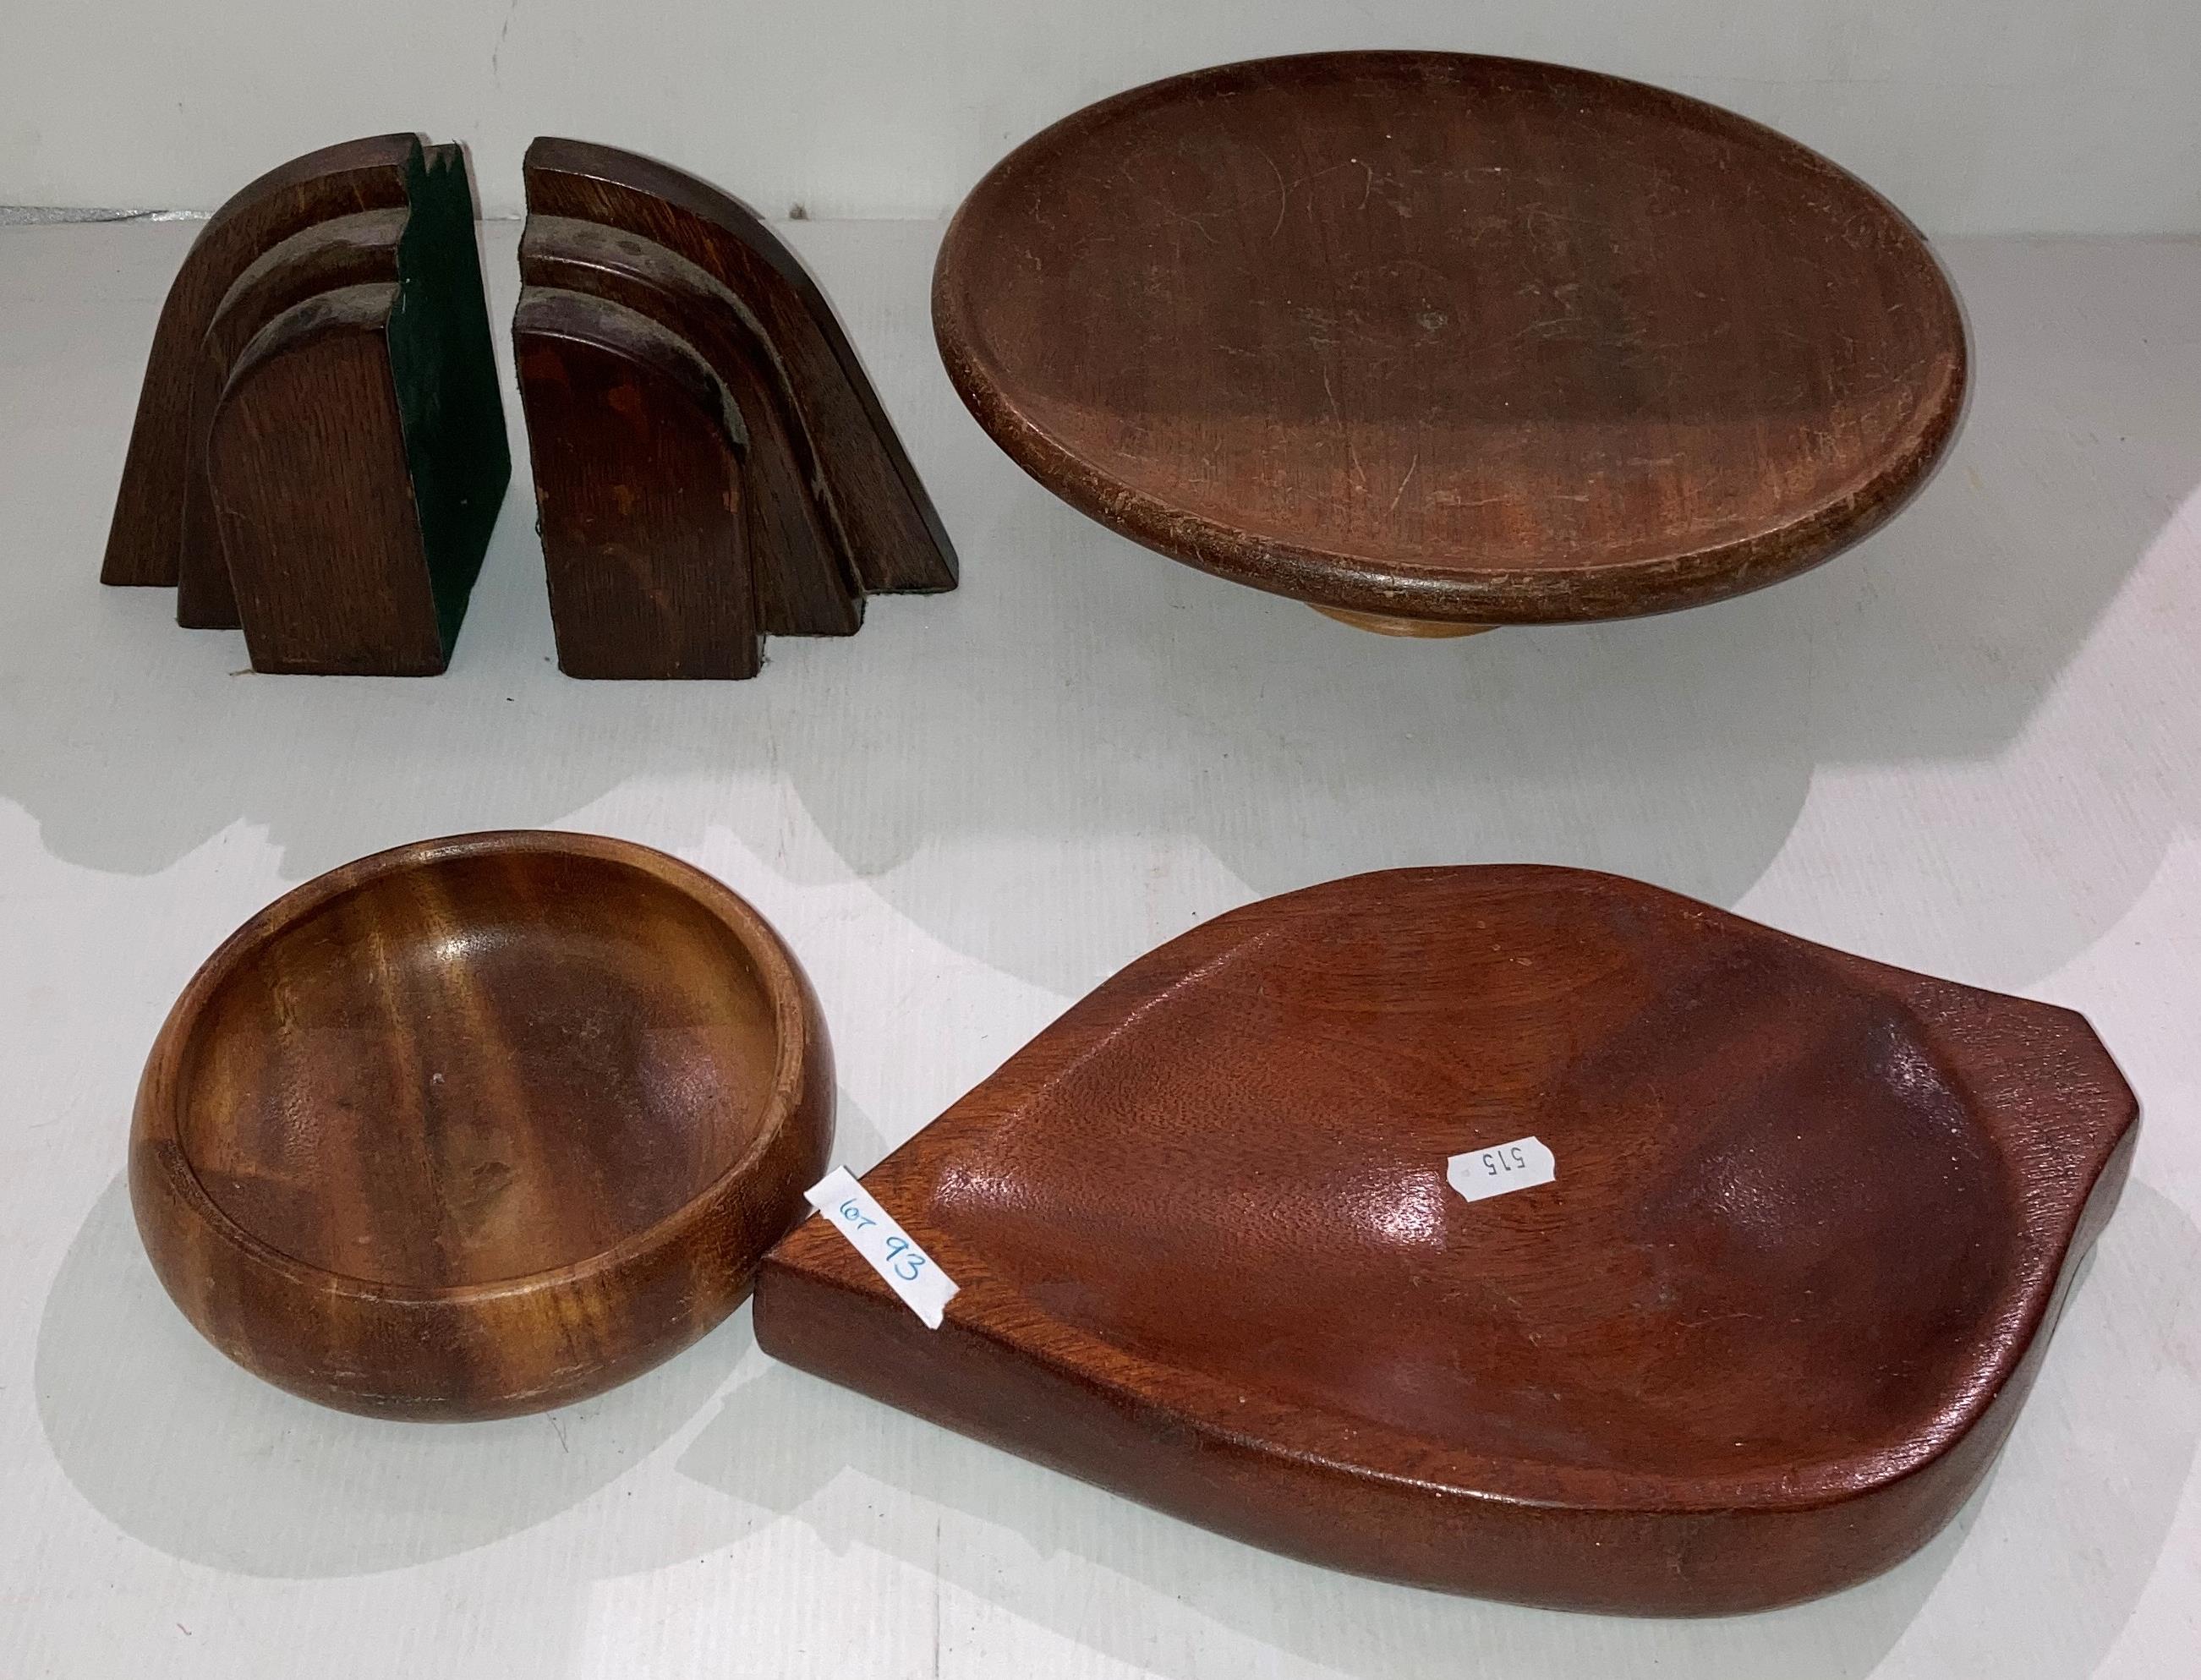 Pair of oak Art Deco-style book ends and three wooden display bowls and plates (saleroom location: